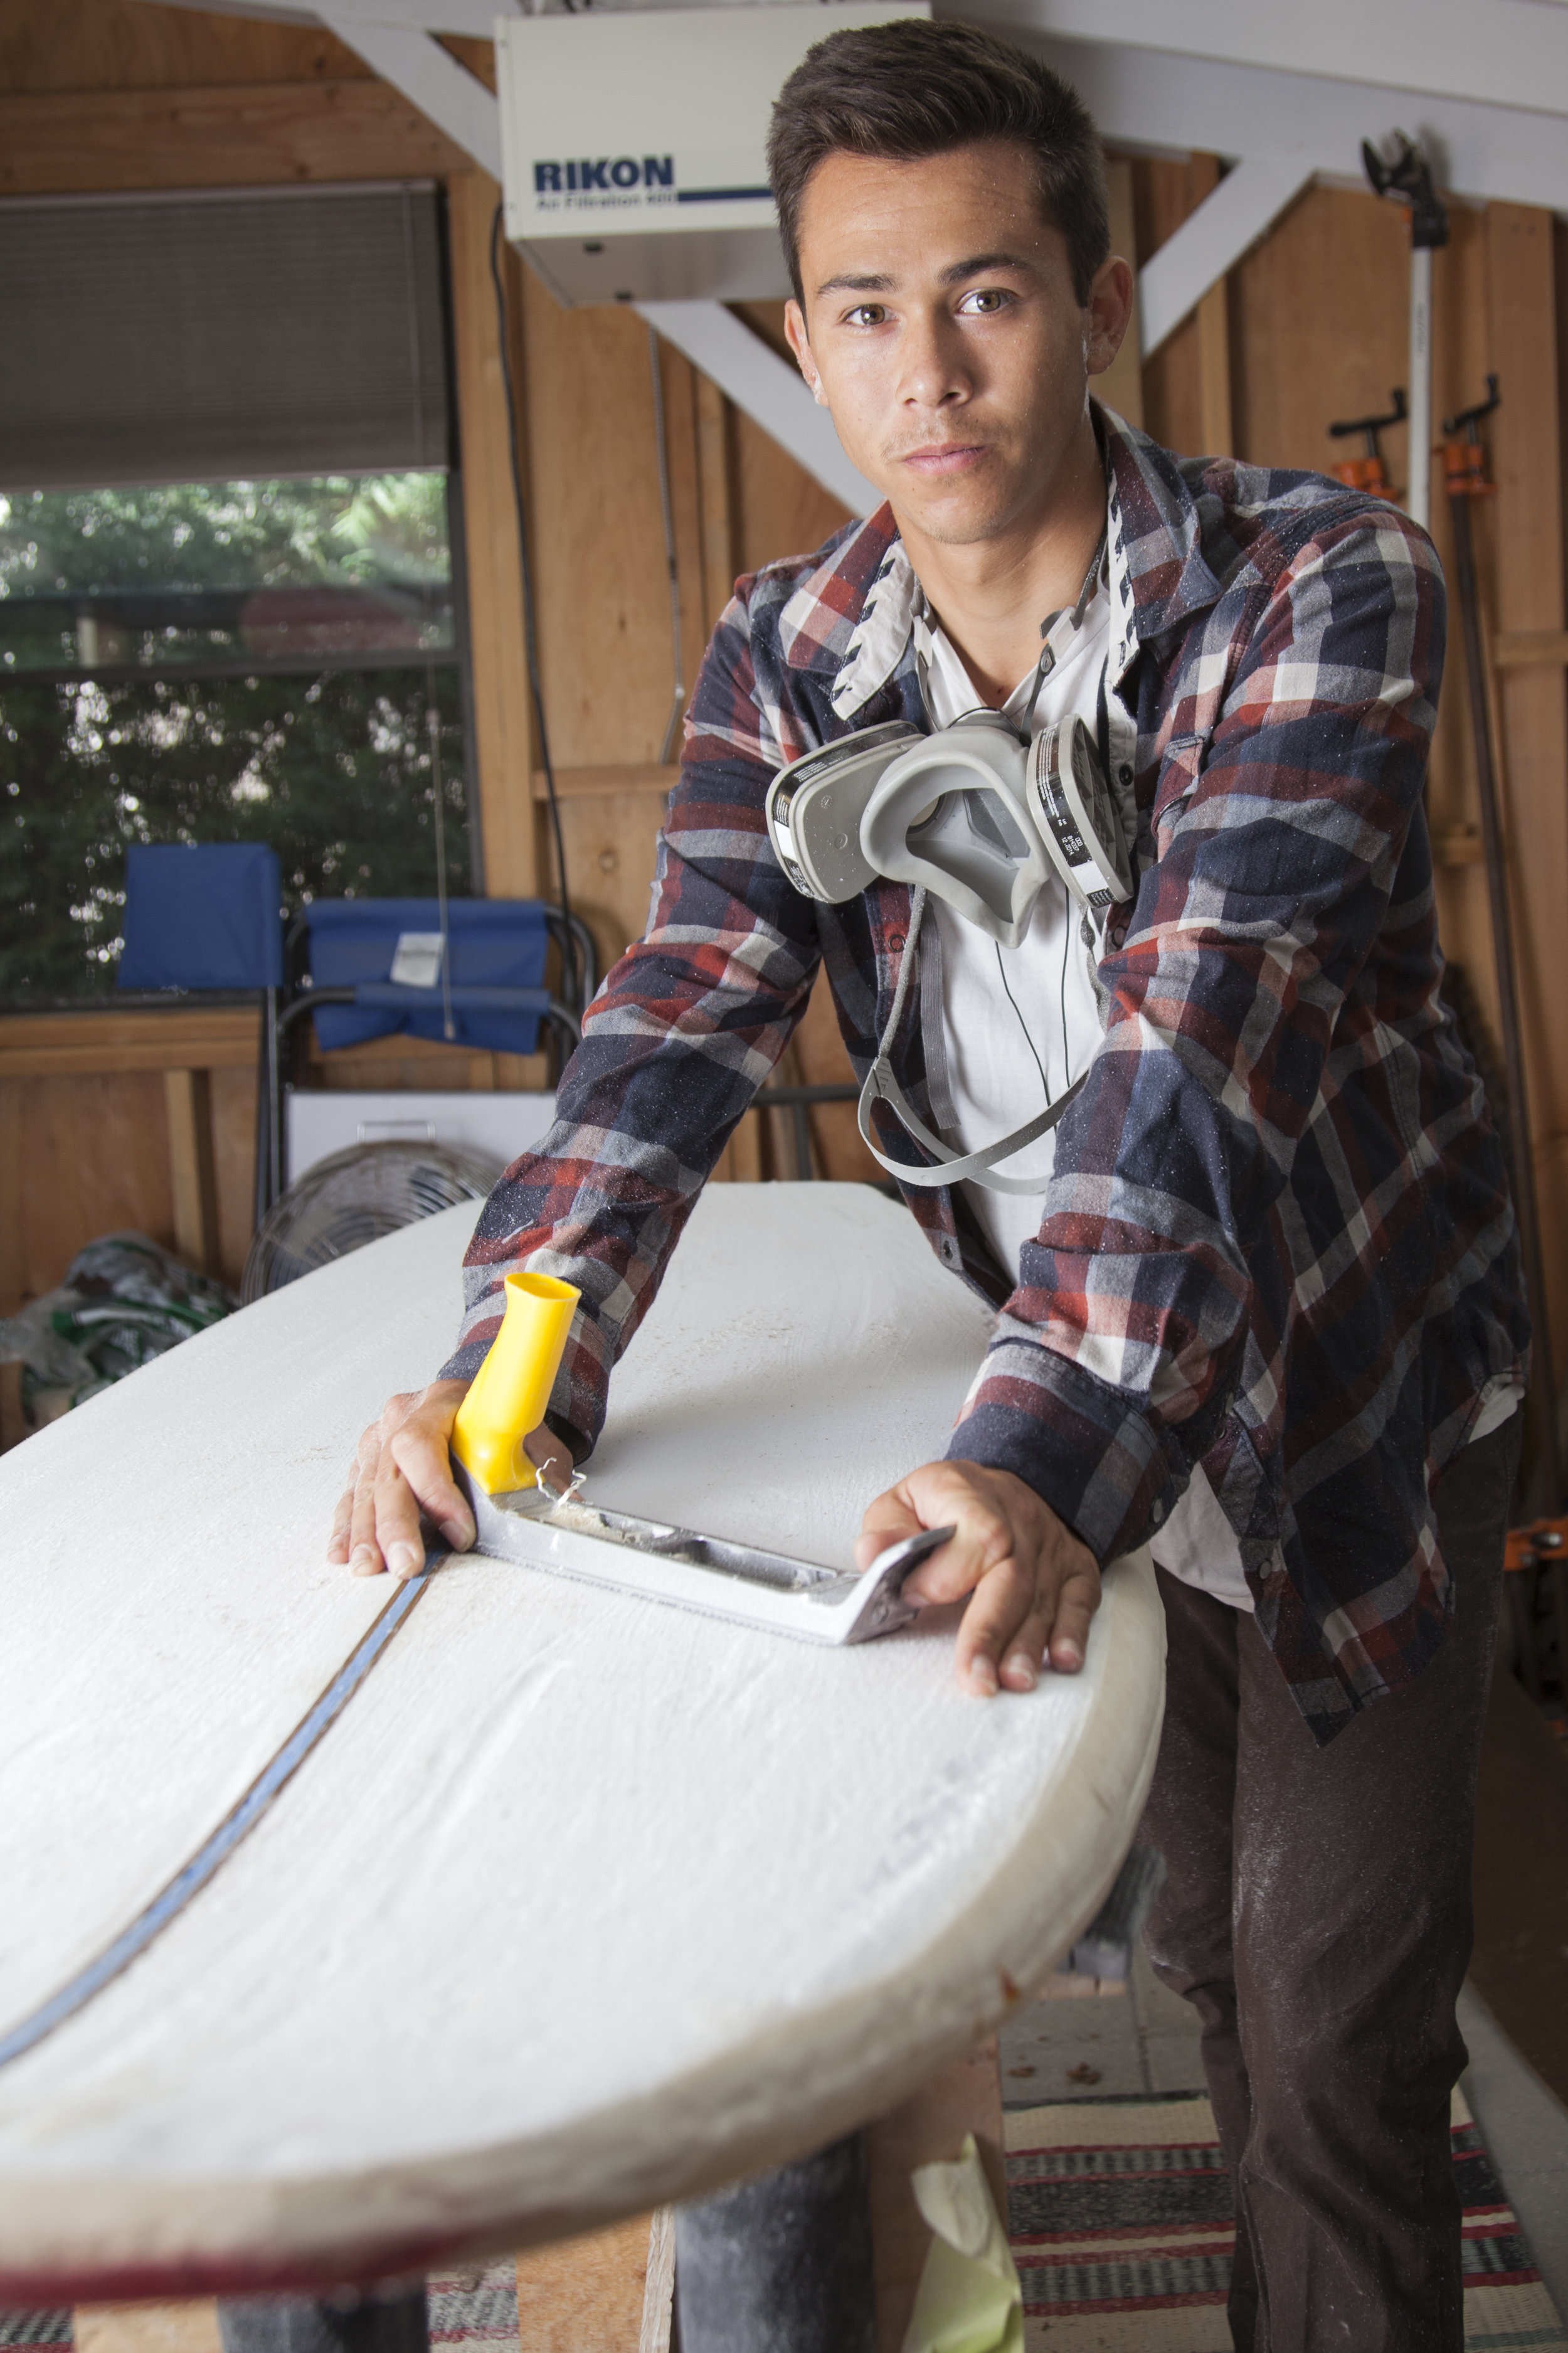  Kieran Giffen works on a custom surfboard inside his workshop in the back yard of his home in Woodland Hills, Calif. on Tuesday, Oct. 4, 2016. Giffen began shaping custom surfboards for his friends when he was 13, but now Giffen receives offers from